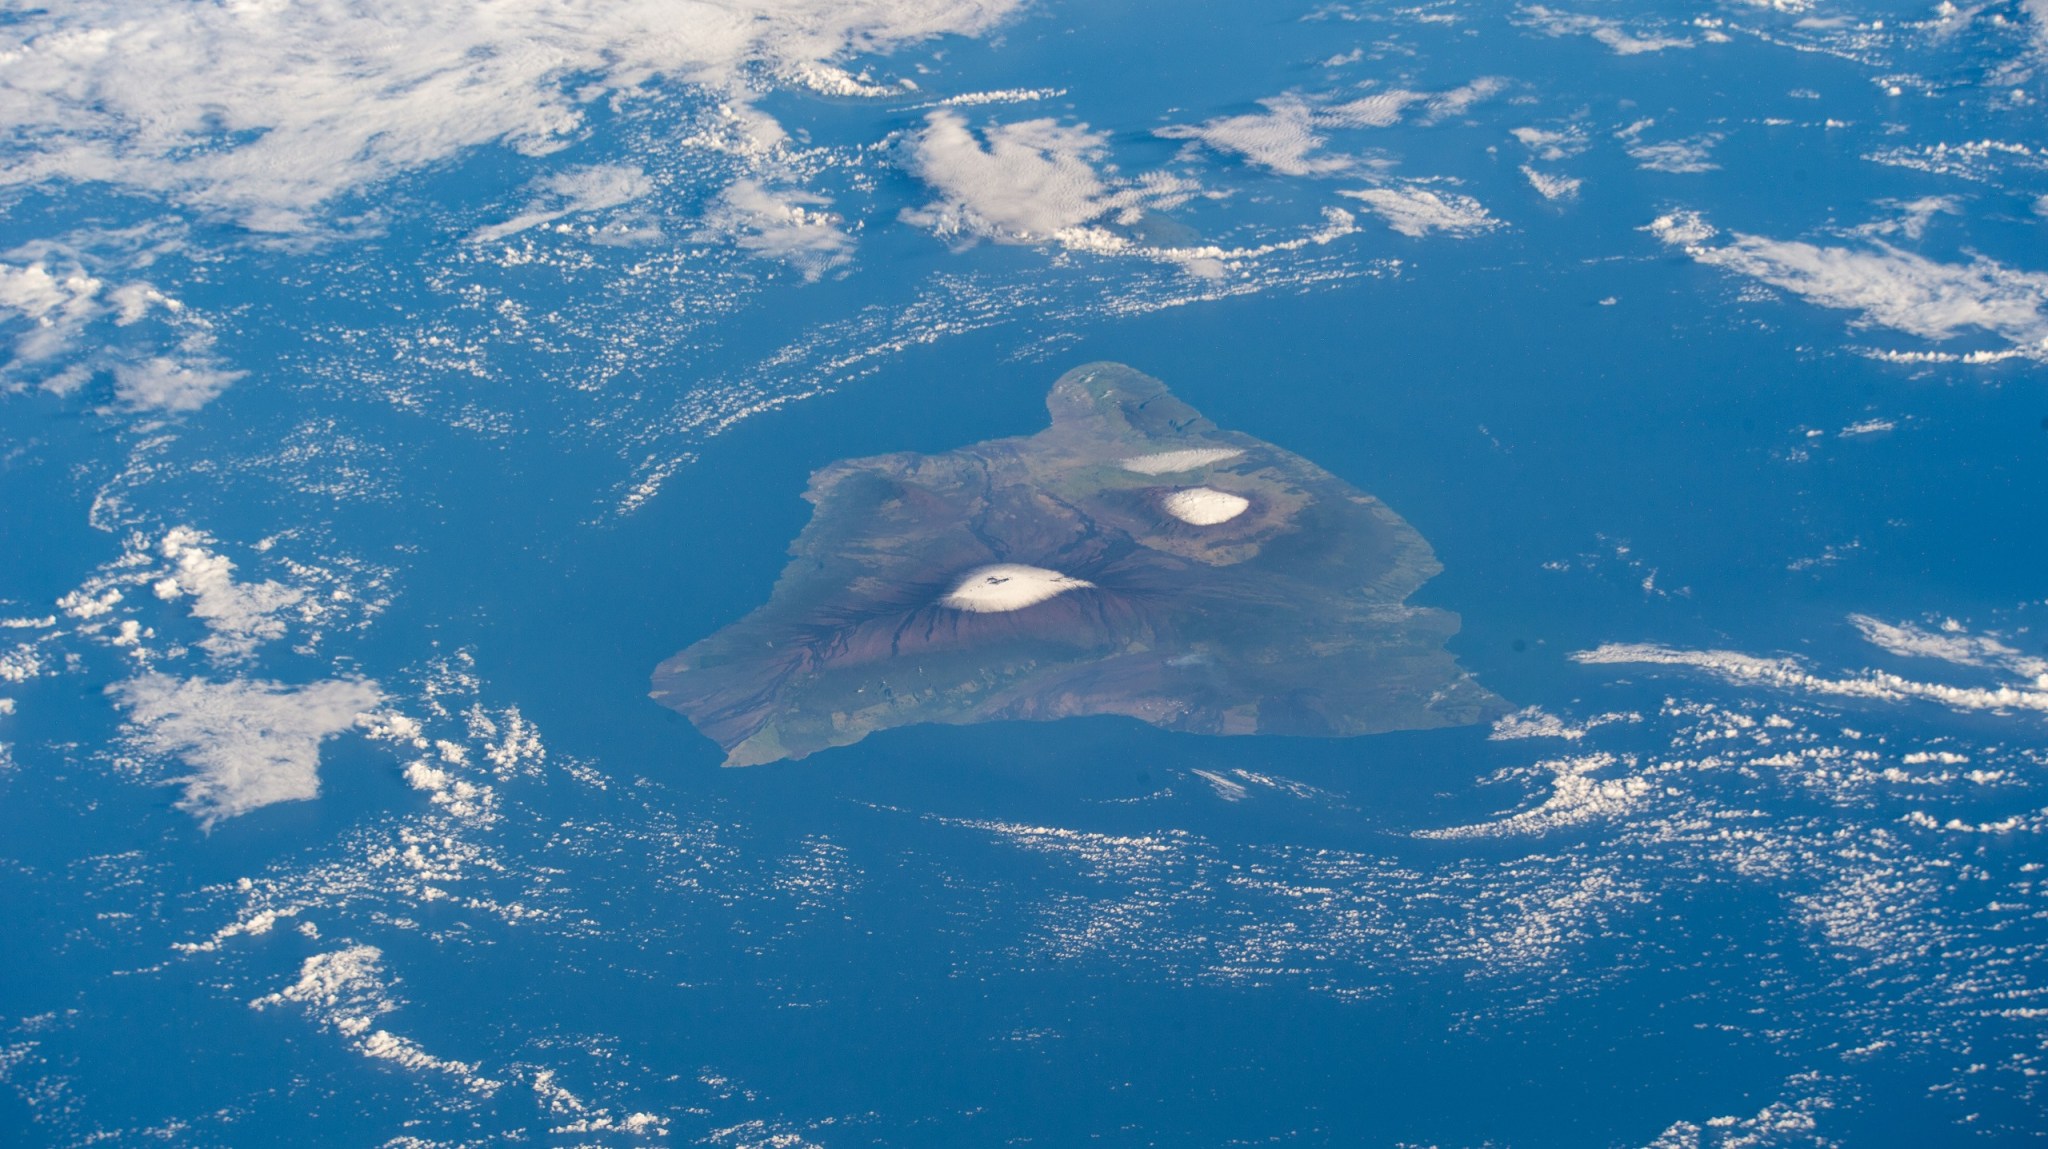 The snow-capped volcanos on the island of Hawaii, Mauna Loa (left) and Mauna Kea (right), pictured from the International Space Station as it orbits 260 miles above the Pacific Ocean.